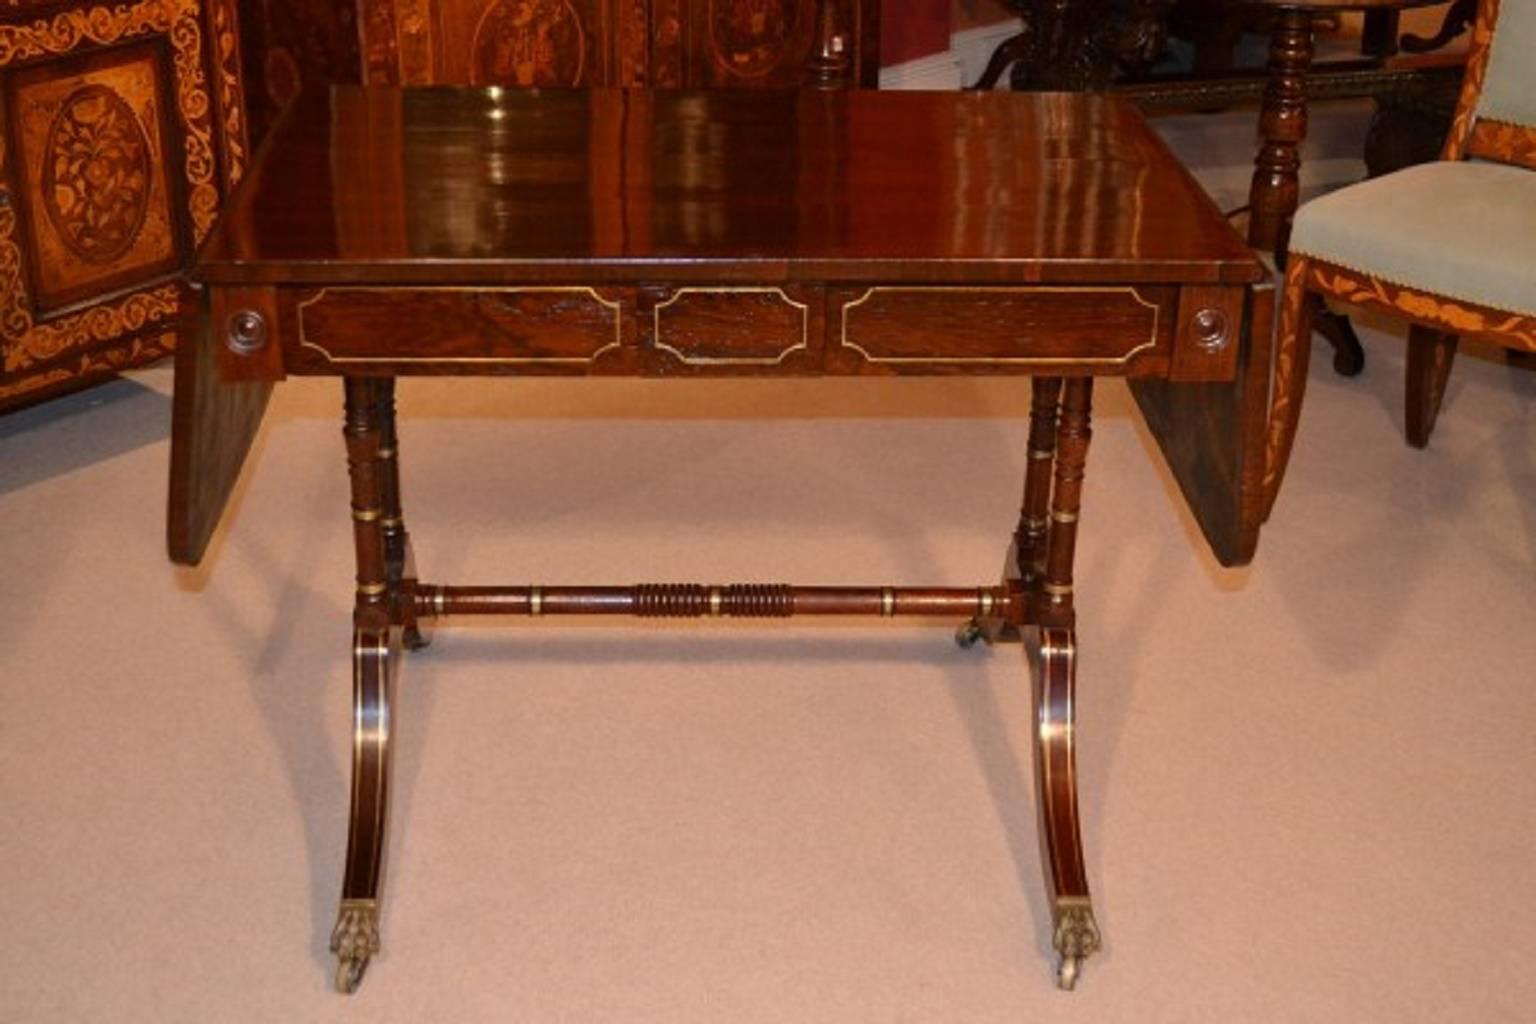 This is a sublime antique Regency rosewood sofa table circa 1820 in date. 

It is crafted from beautiful rosewood which has been masterfully inlaid with brass, and has two capacious drawers. It stands on a twin base with stretcher and the legs